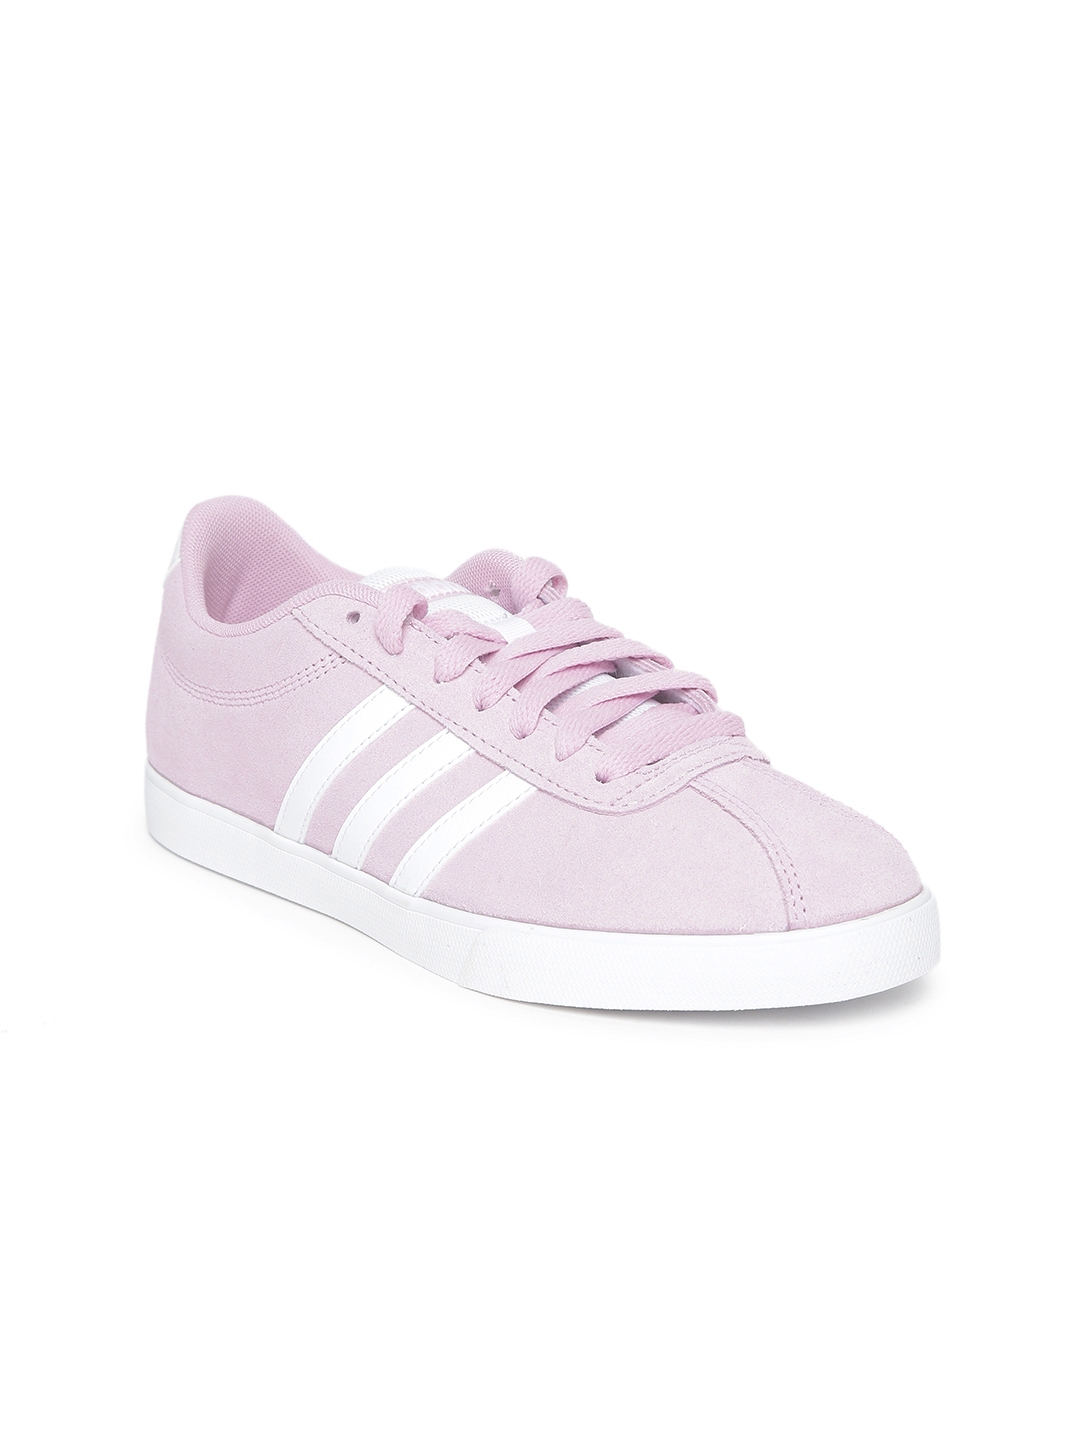 Buy ADIDAS Women Pink COURTSET Casual Shoes - Casual Shoes for Women ...